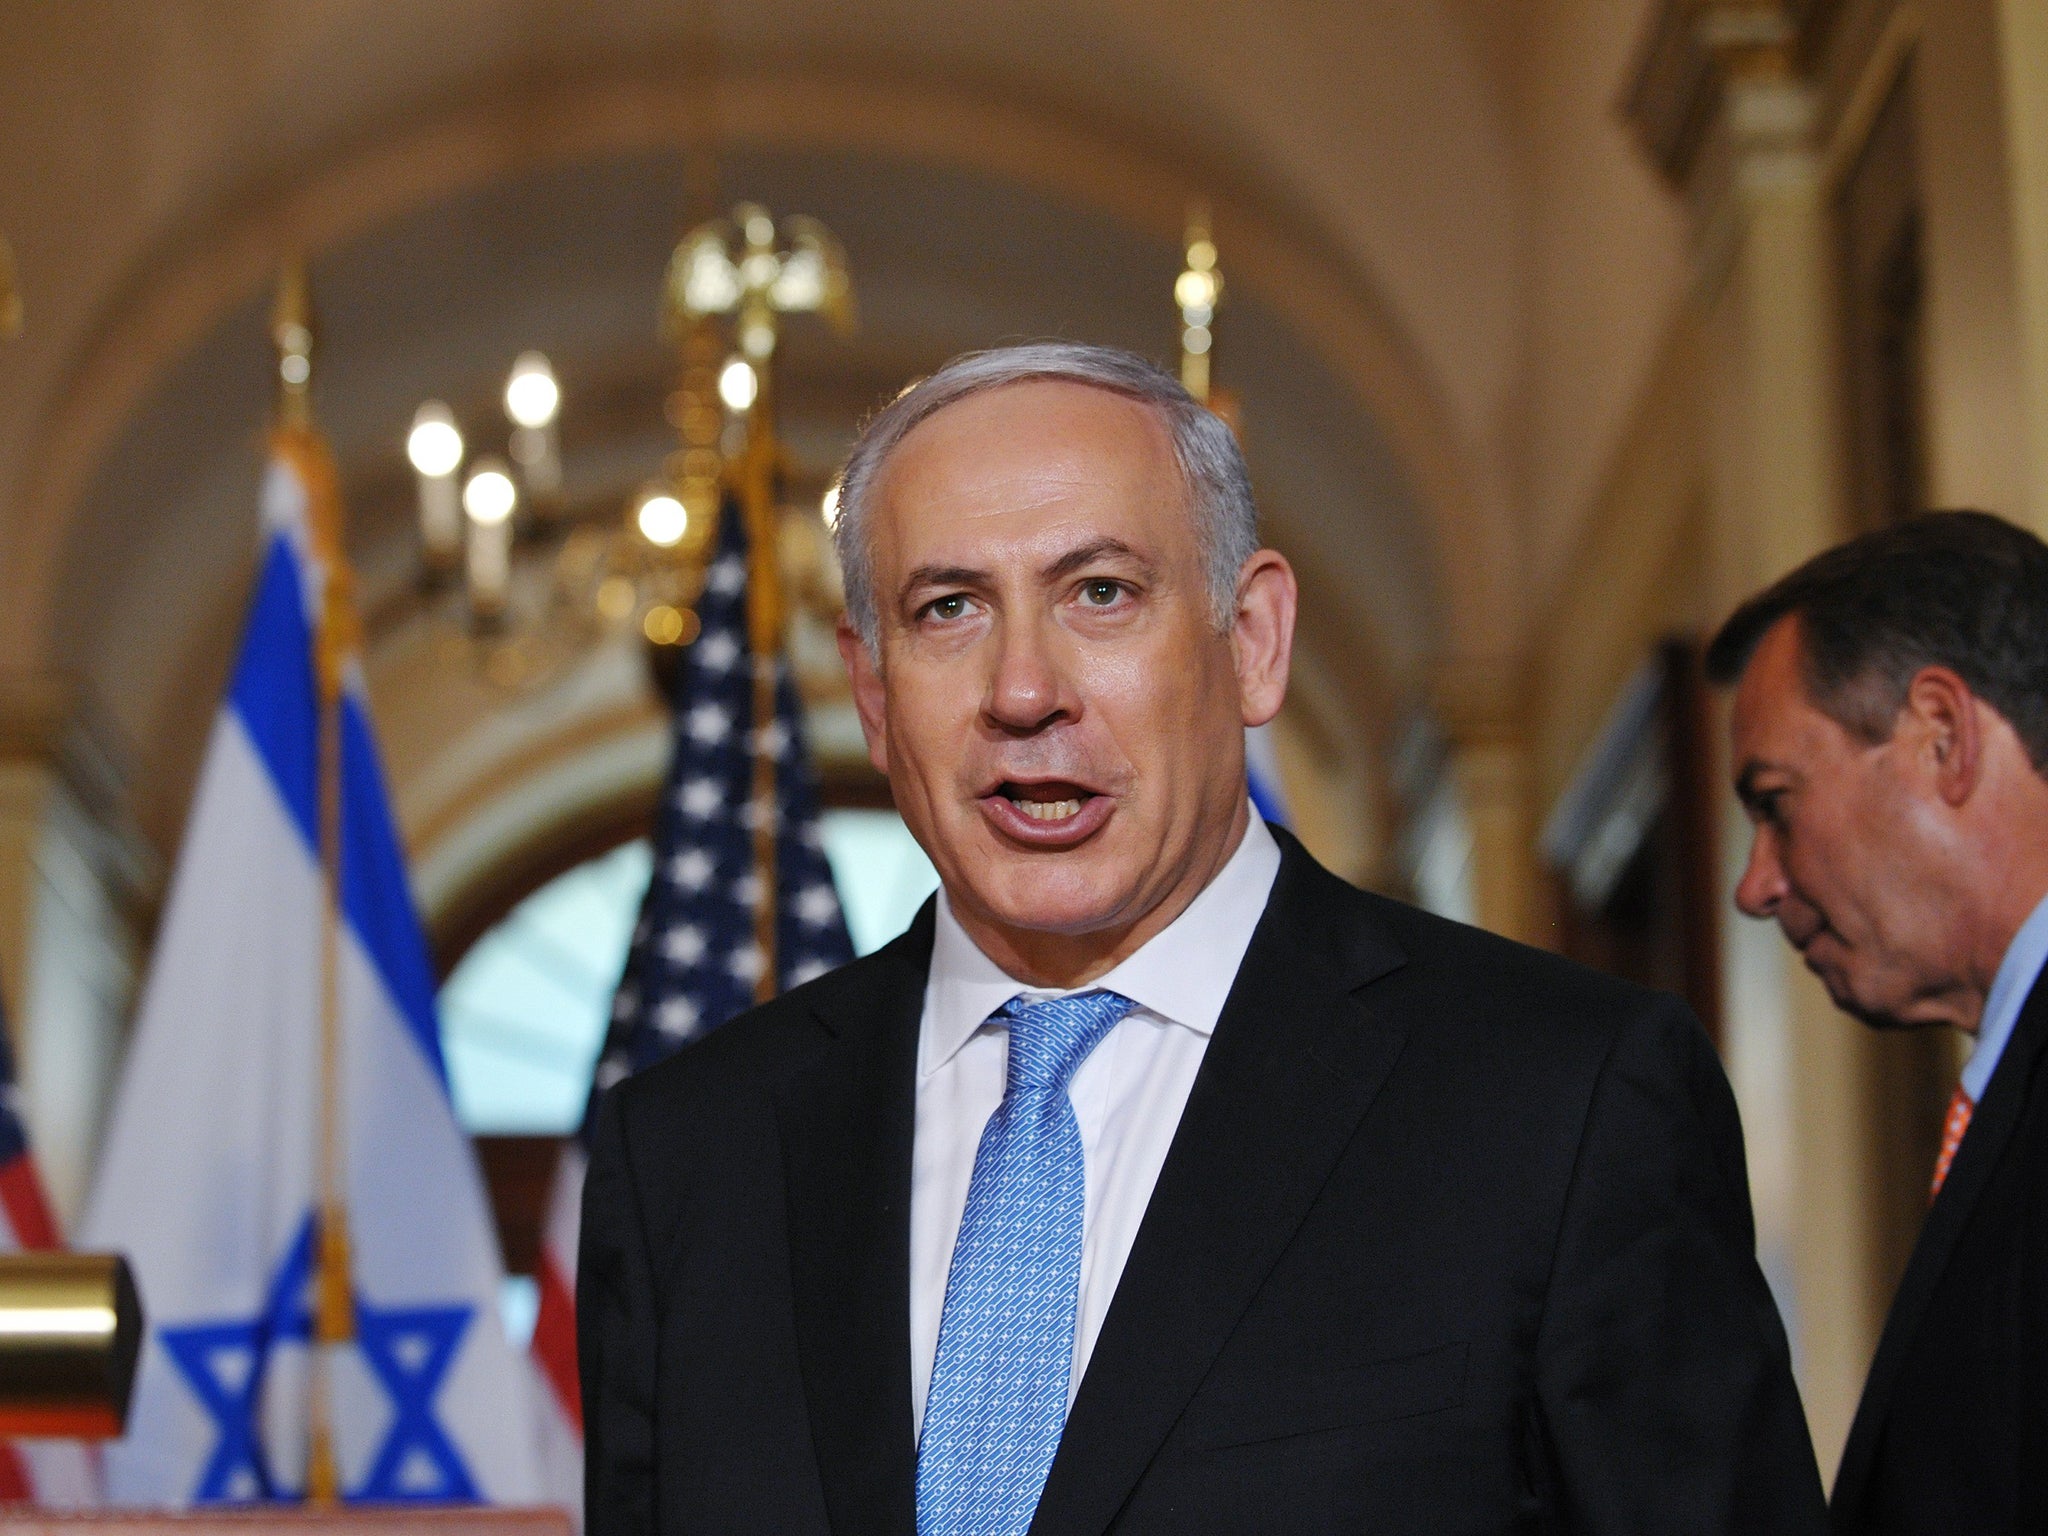 Israeli Prime Minister Benjamin Netanyahu after an adress to a joint session of Congress in the US